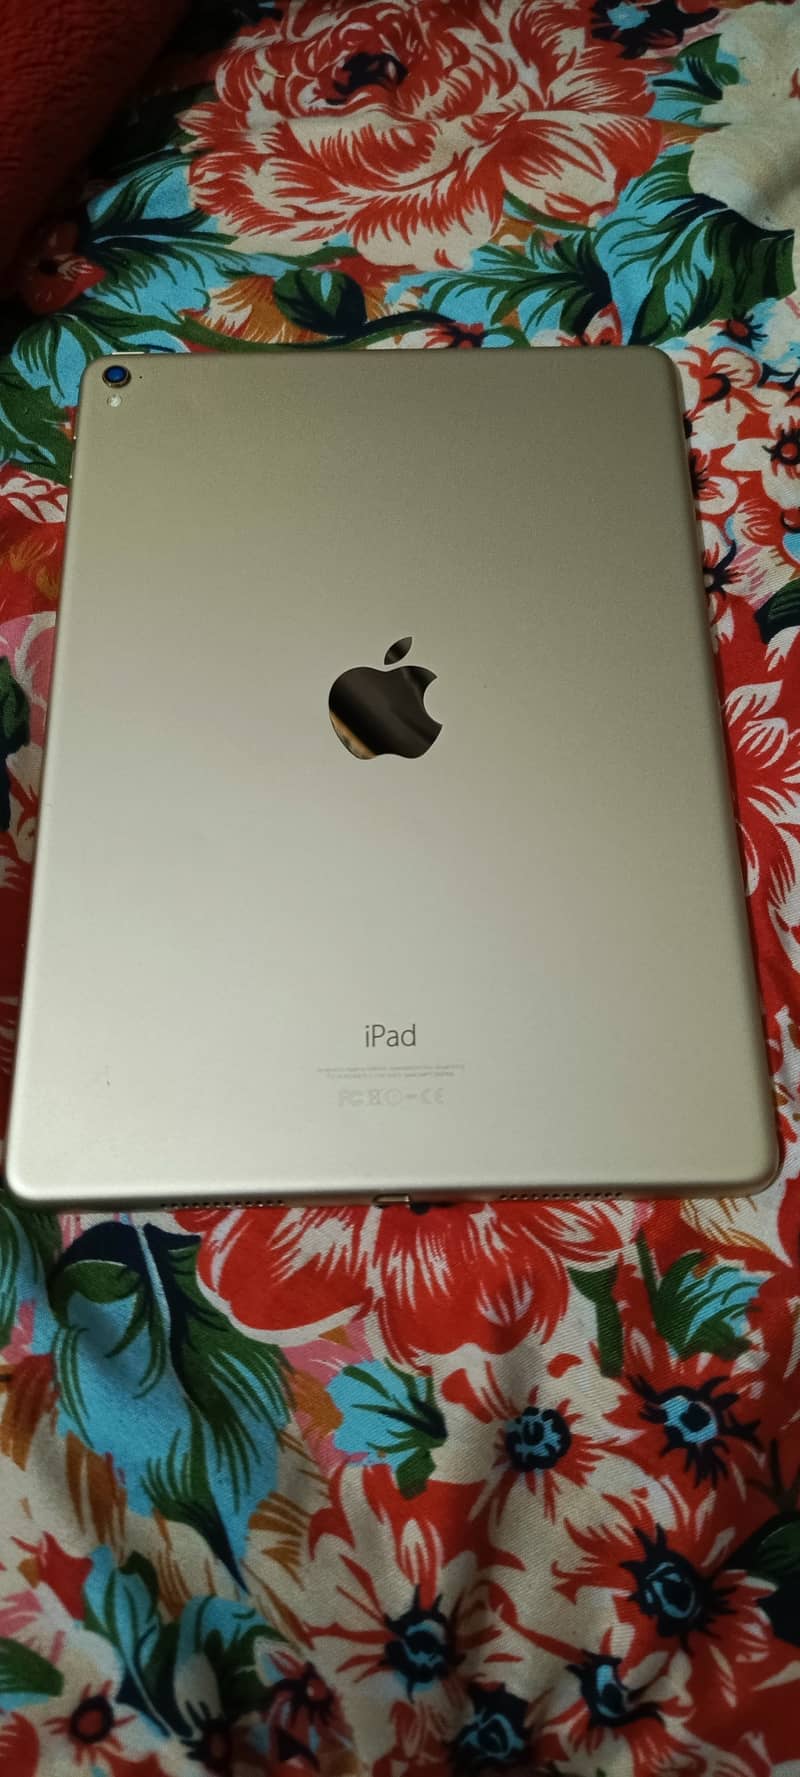 ipad Pro 128 GB gold color water pack lush condition 4